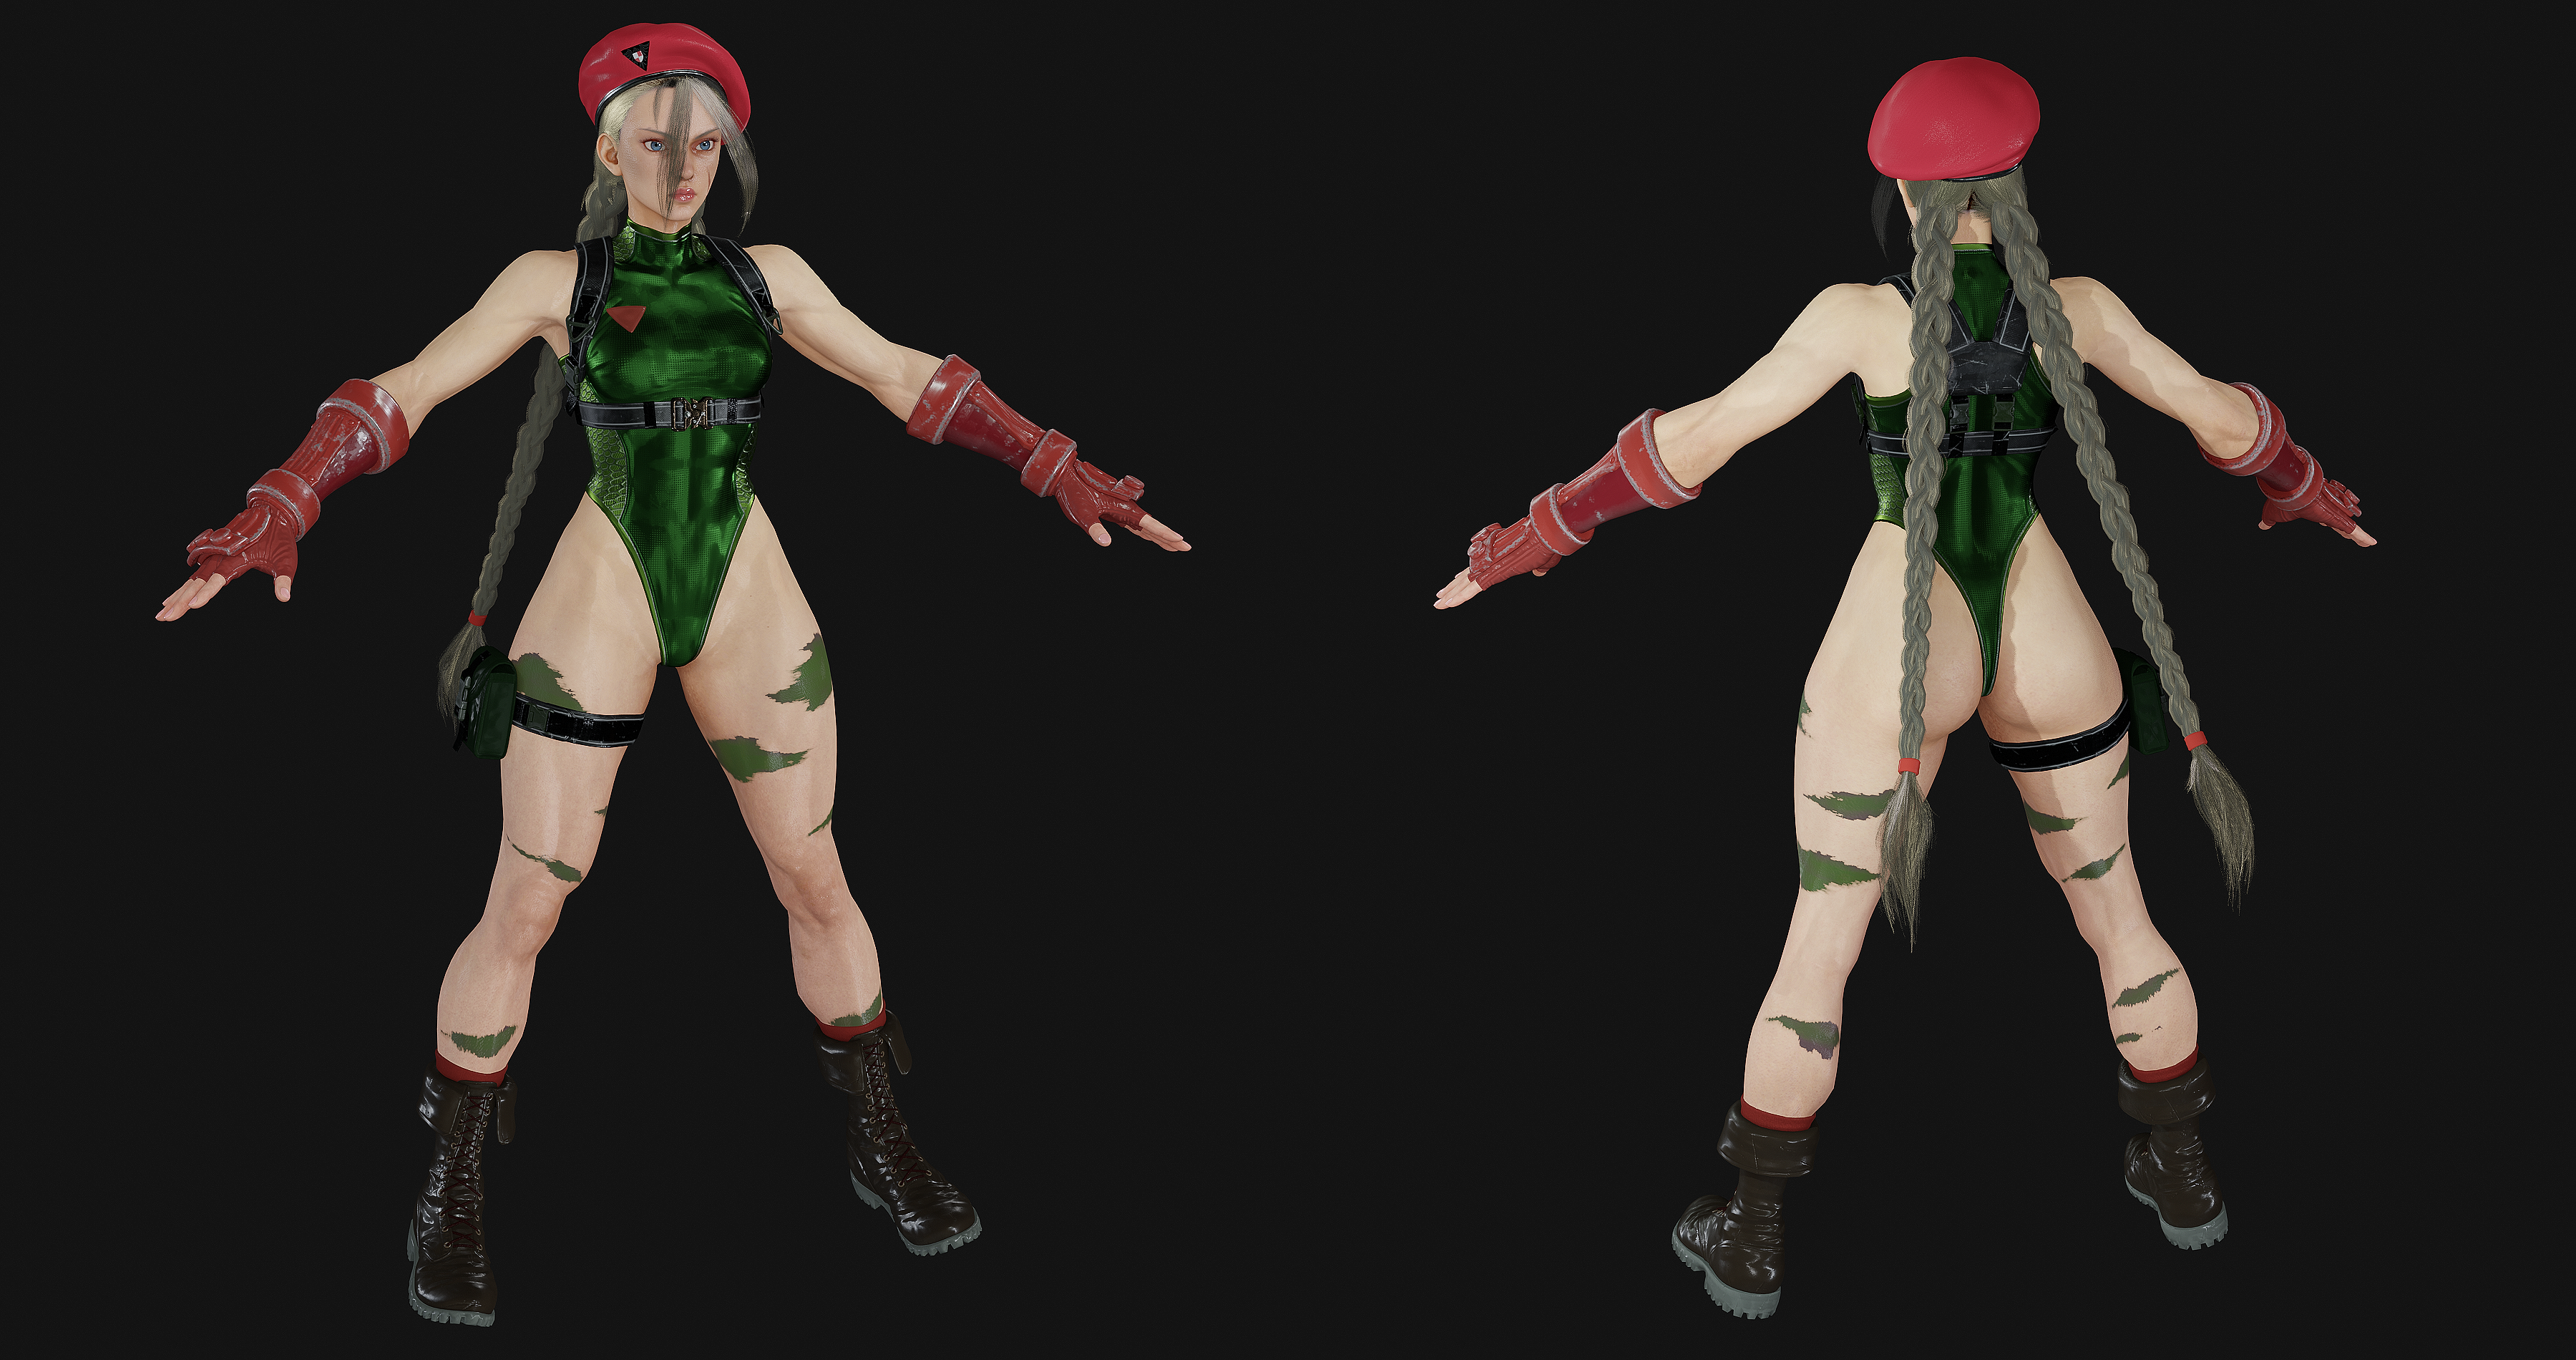 Cammy White [SF6] - SF6 outfit by zeneox on DeviantArt